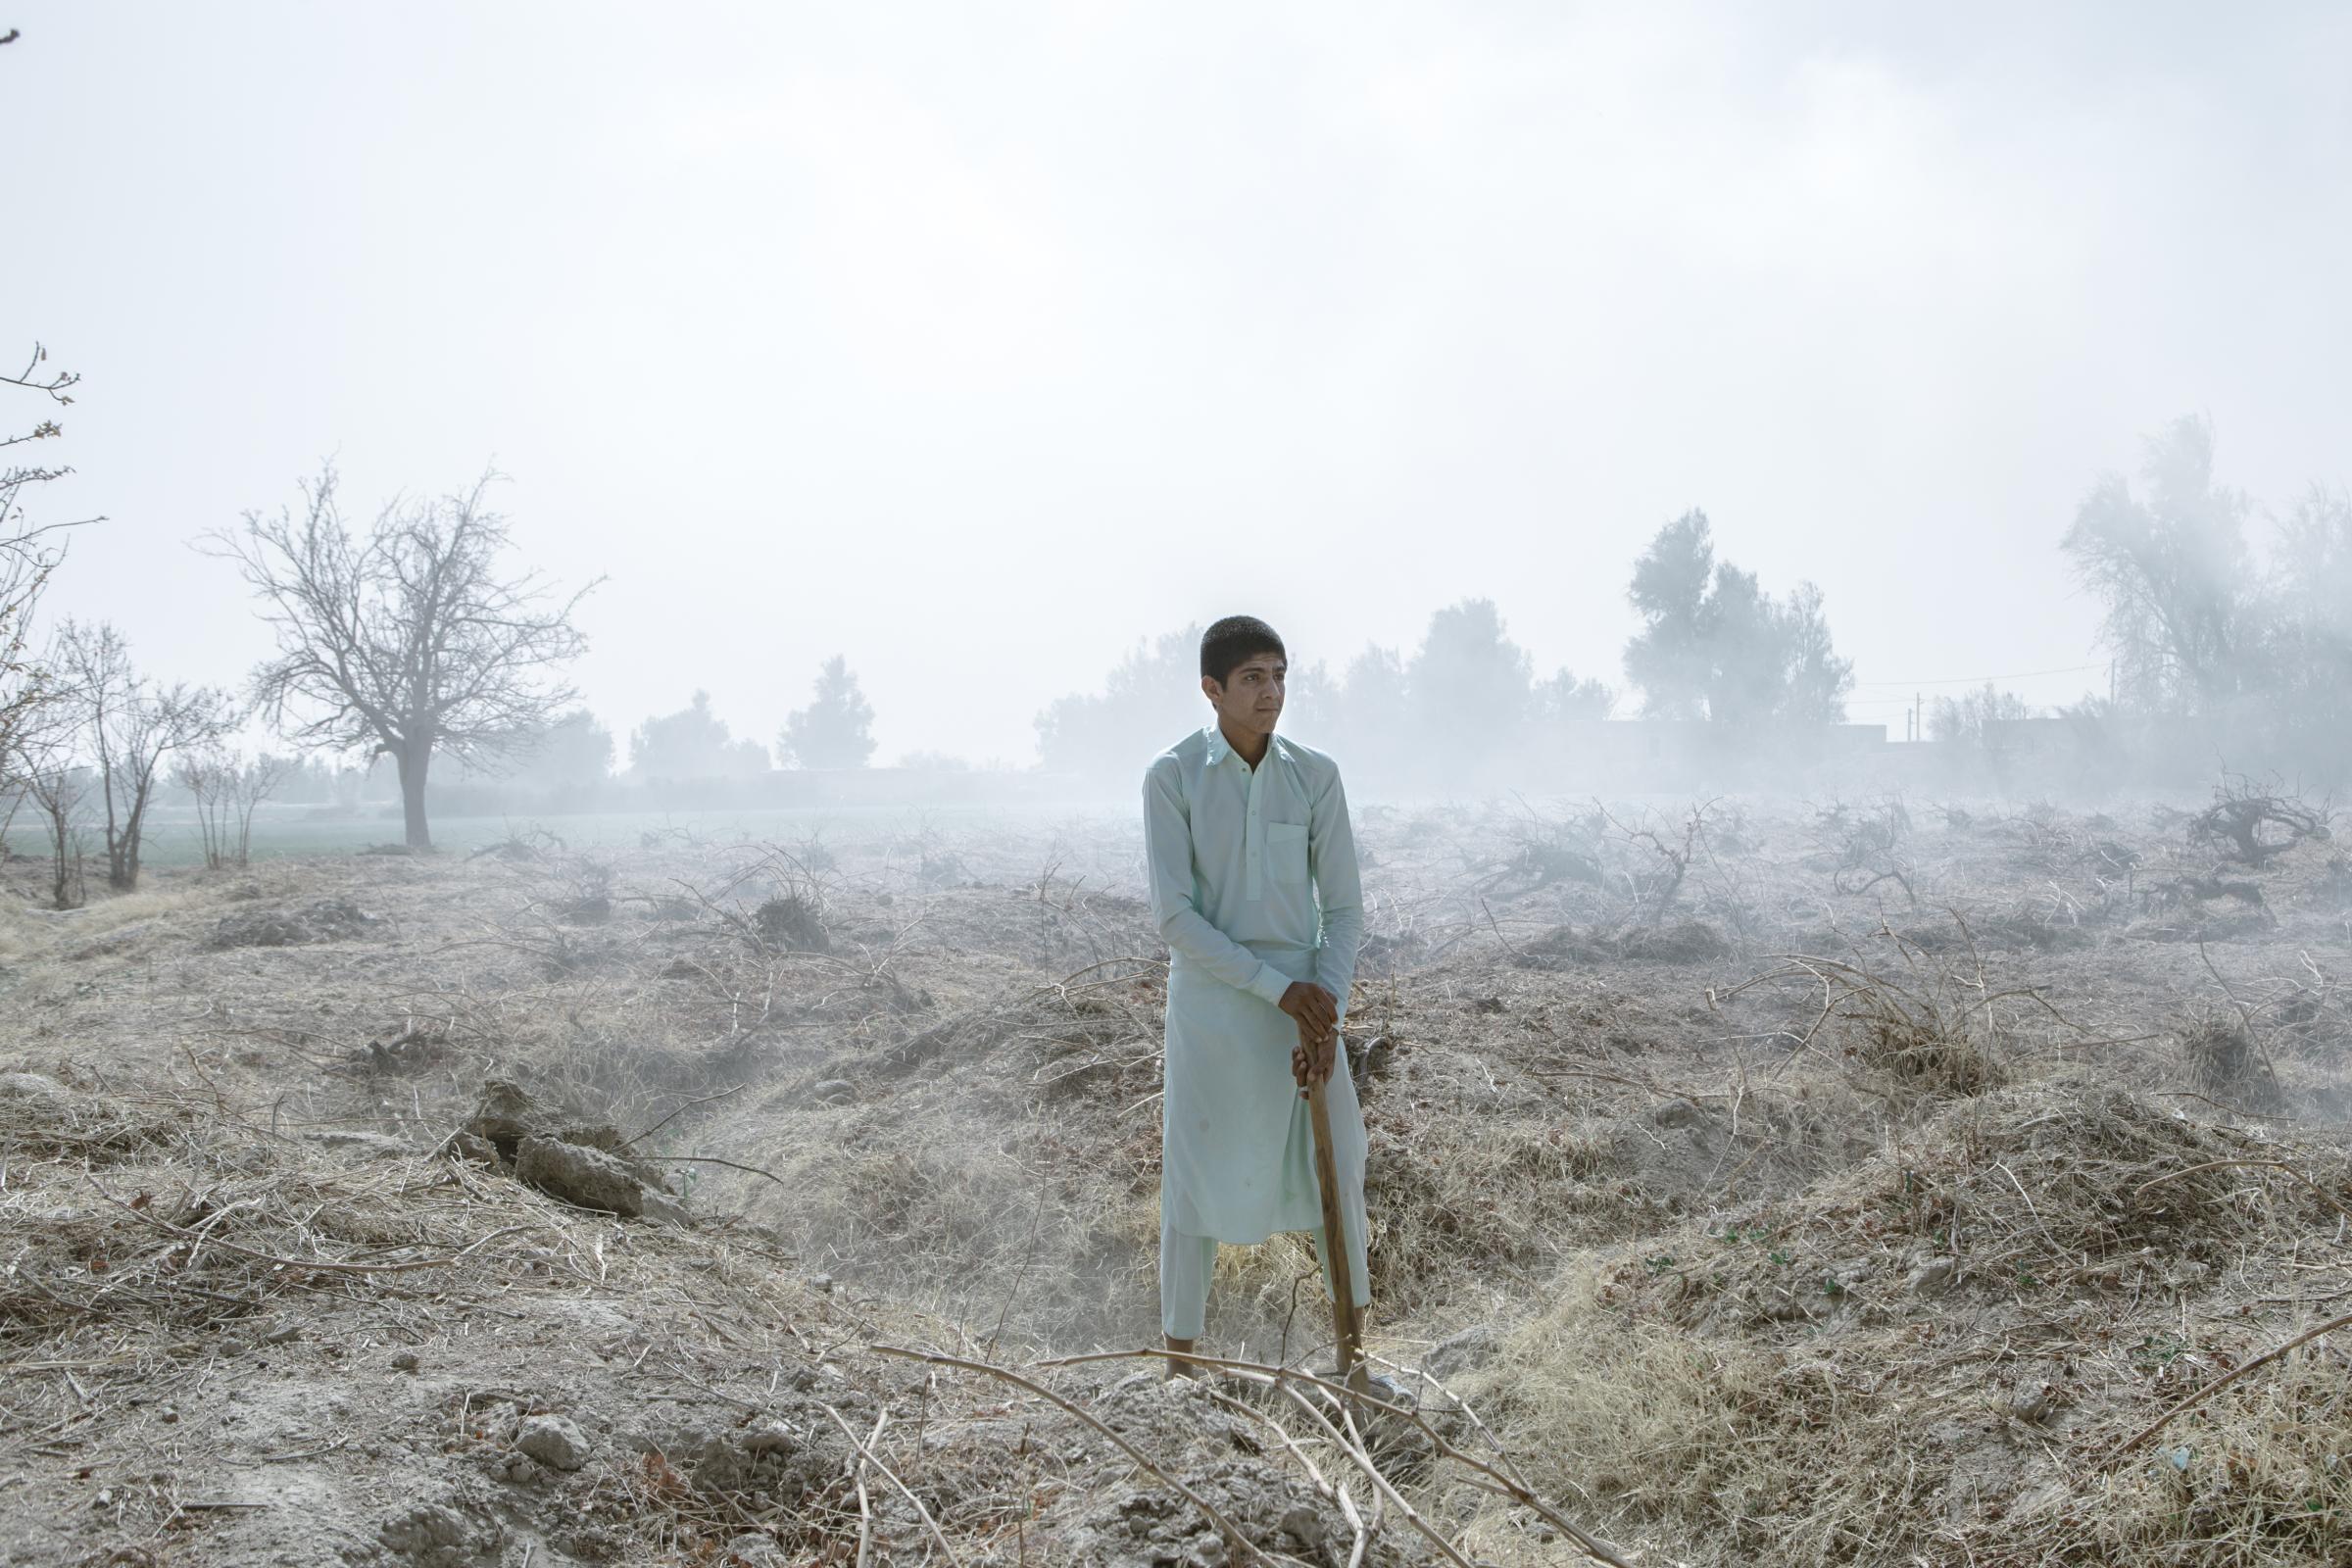 IN THE DESERT OF WETLANDS -   Mohammad, 16, is preparing the land for farming with...